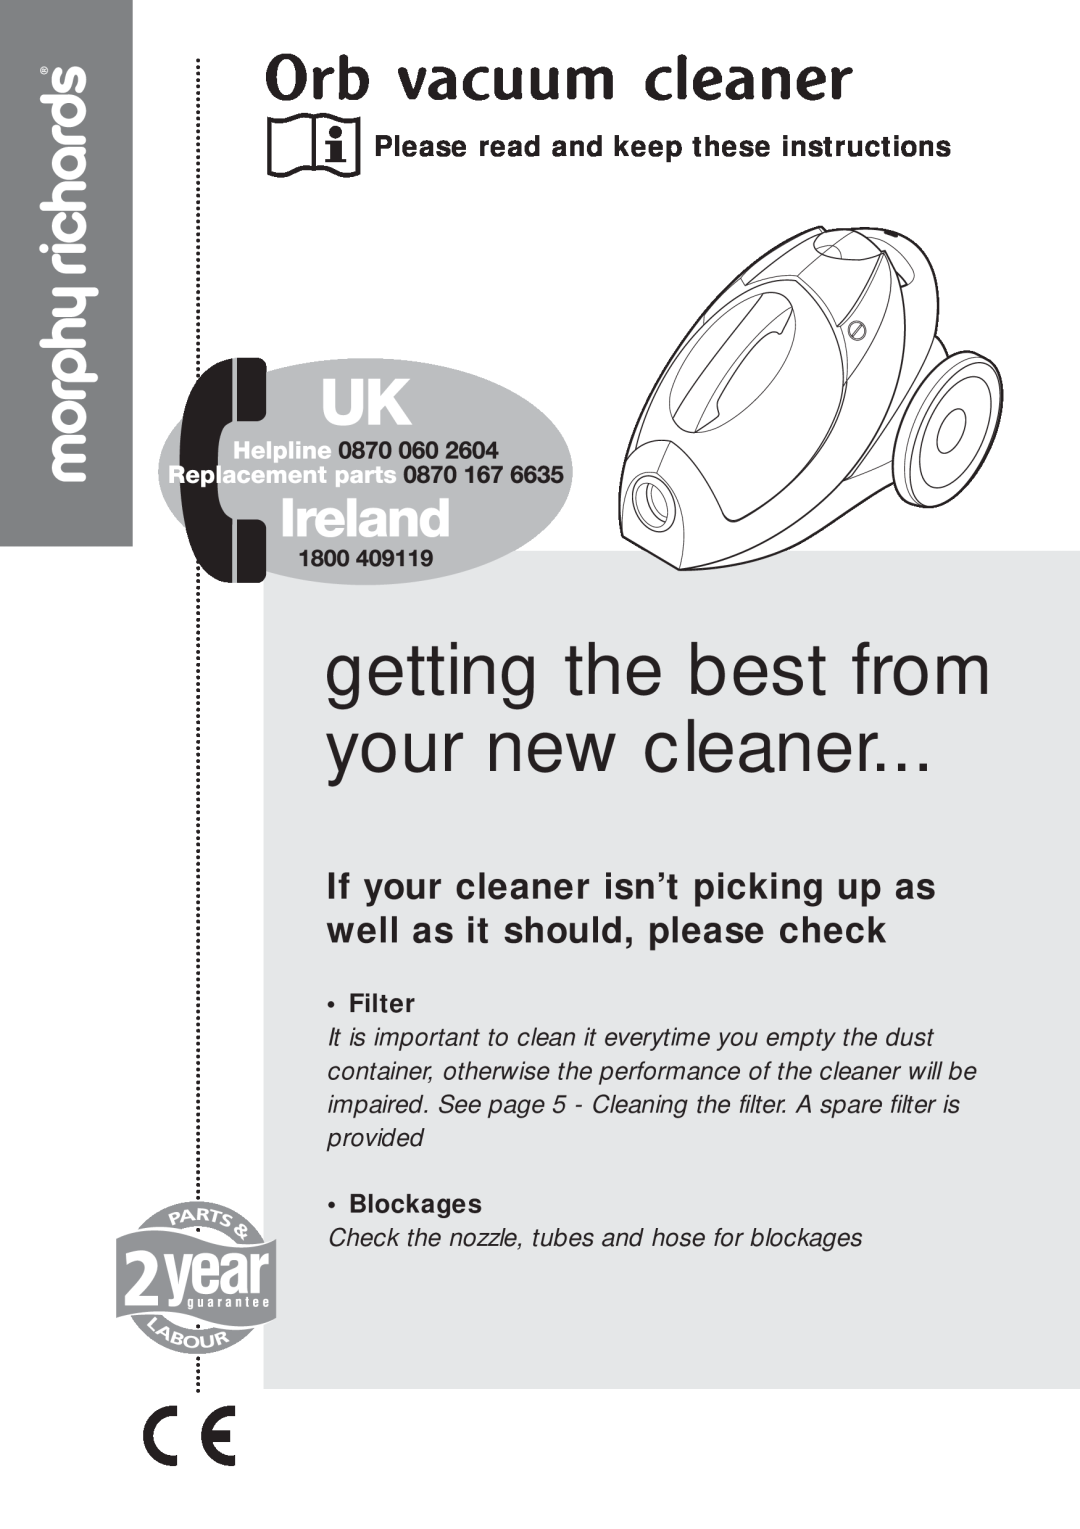 Morphy Richards Orb vacuum cleaner manual getting the best from your new cleaner, Please read and keep these instructions 